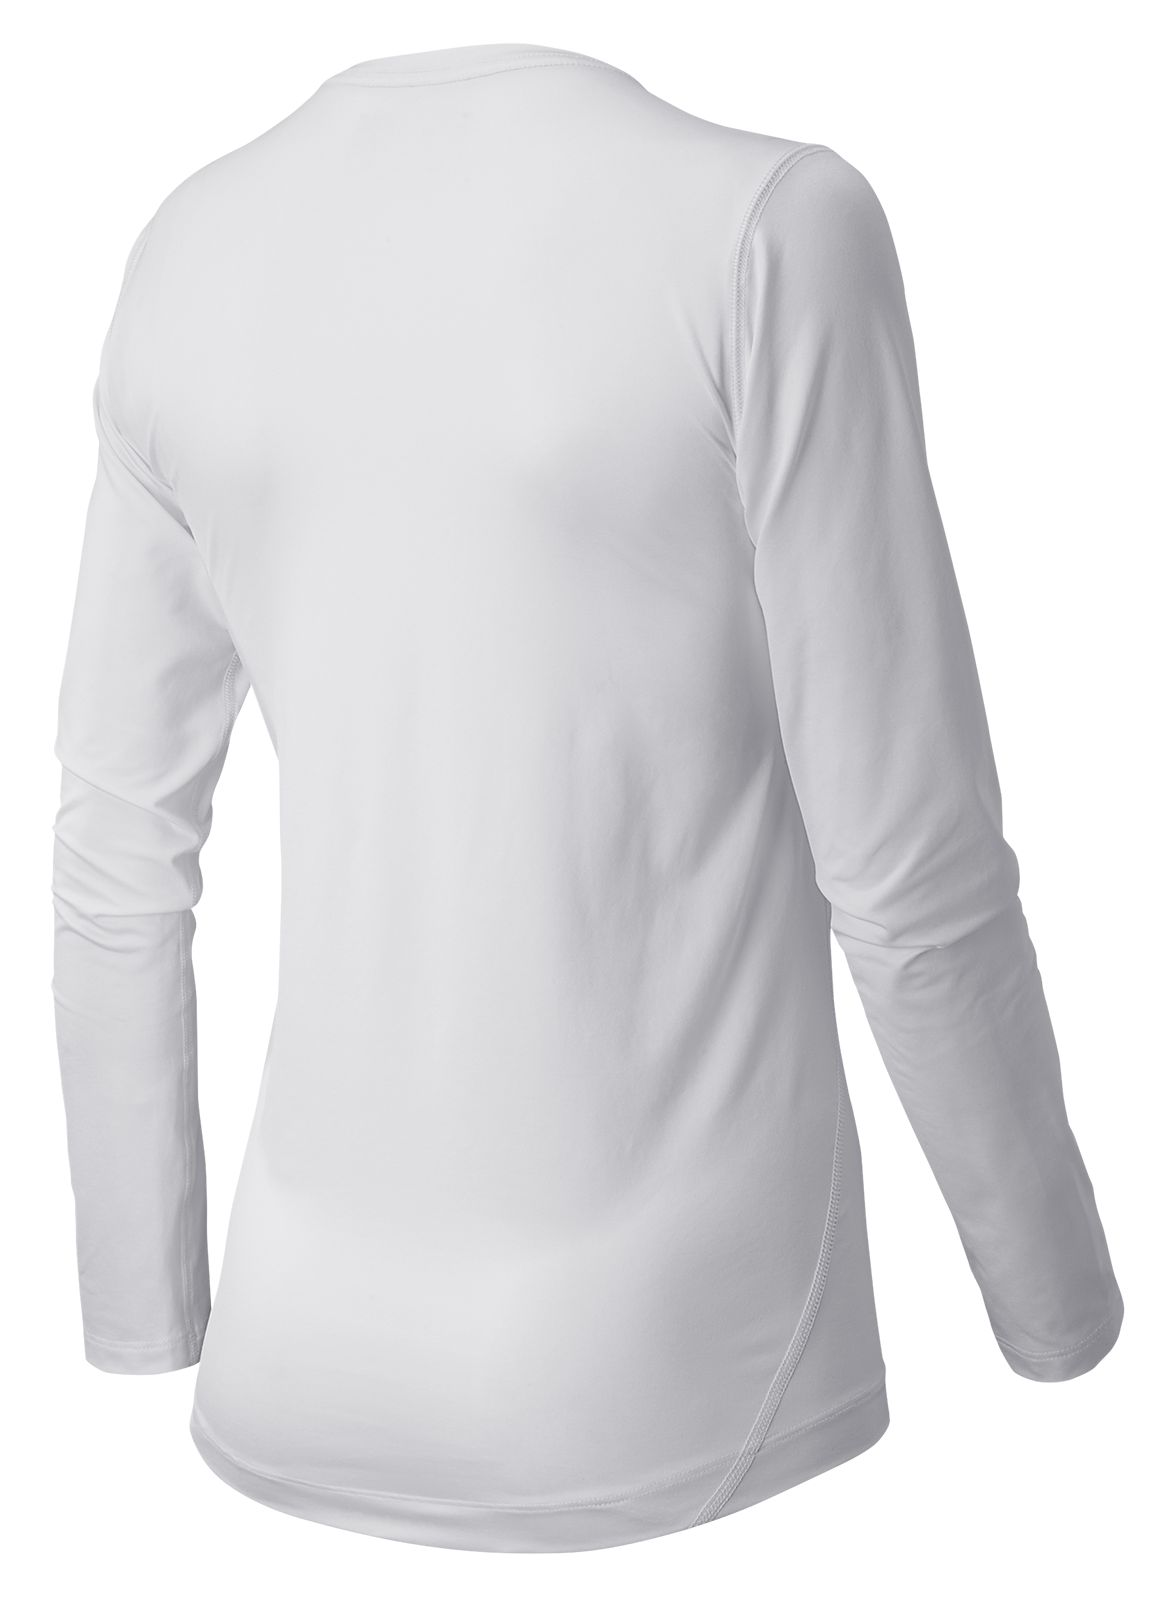 Women's NBW Long Sleeve Compression Top, White image number 1